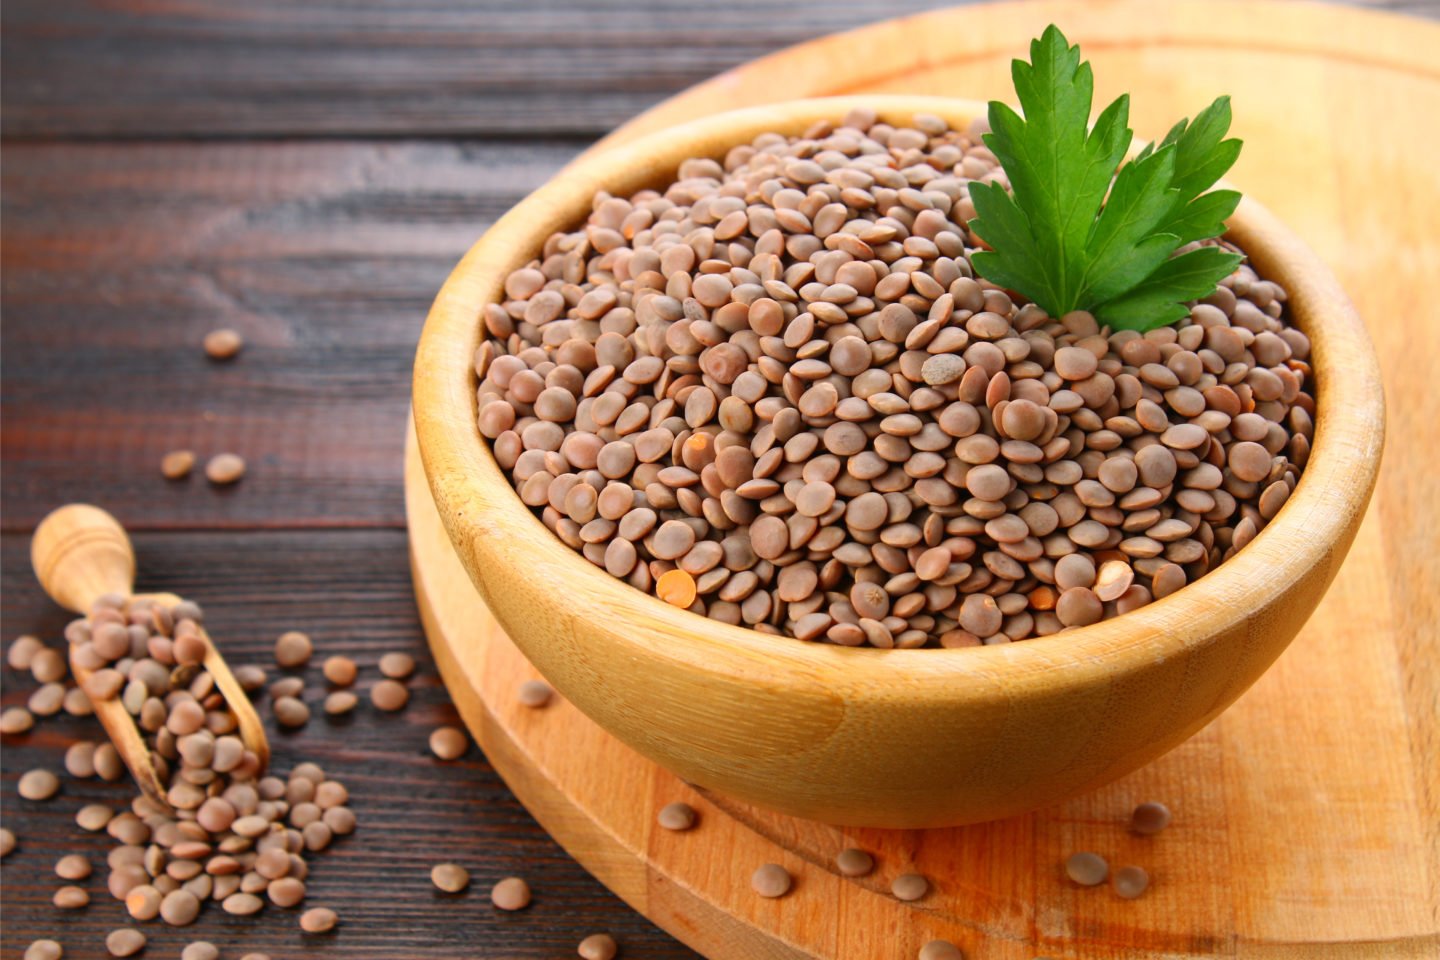 raw lentils in wooden bowl with wooden scoop